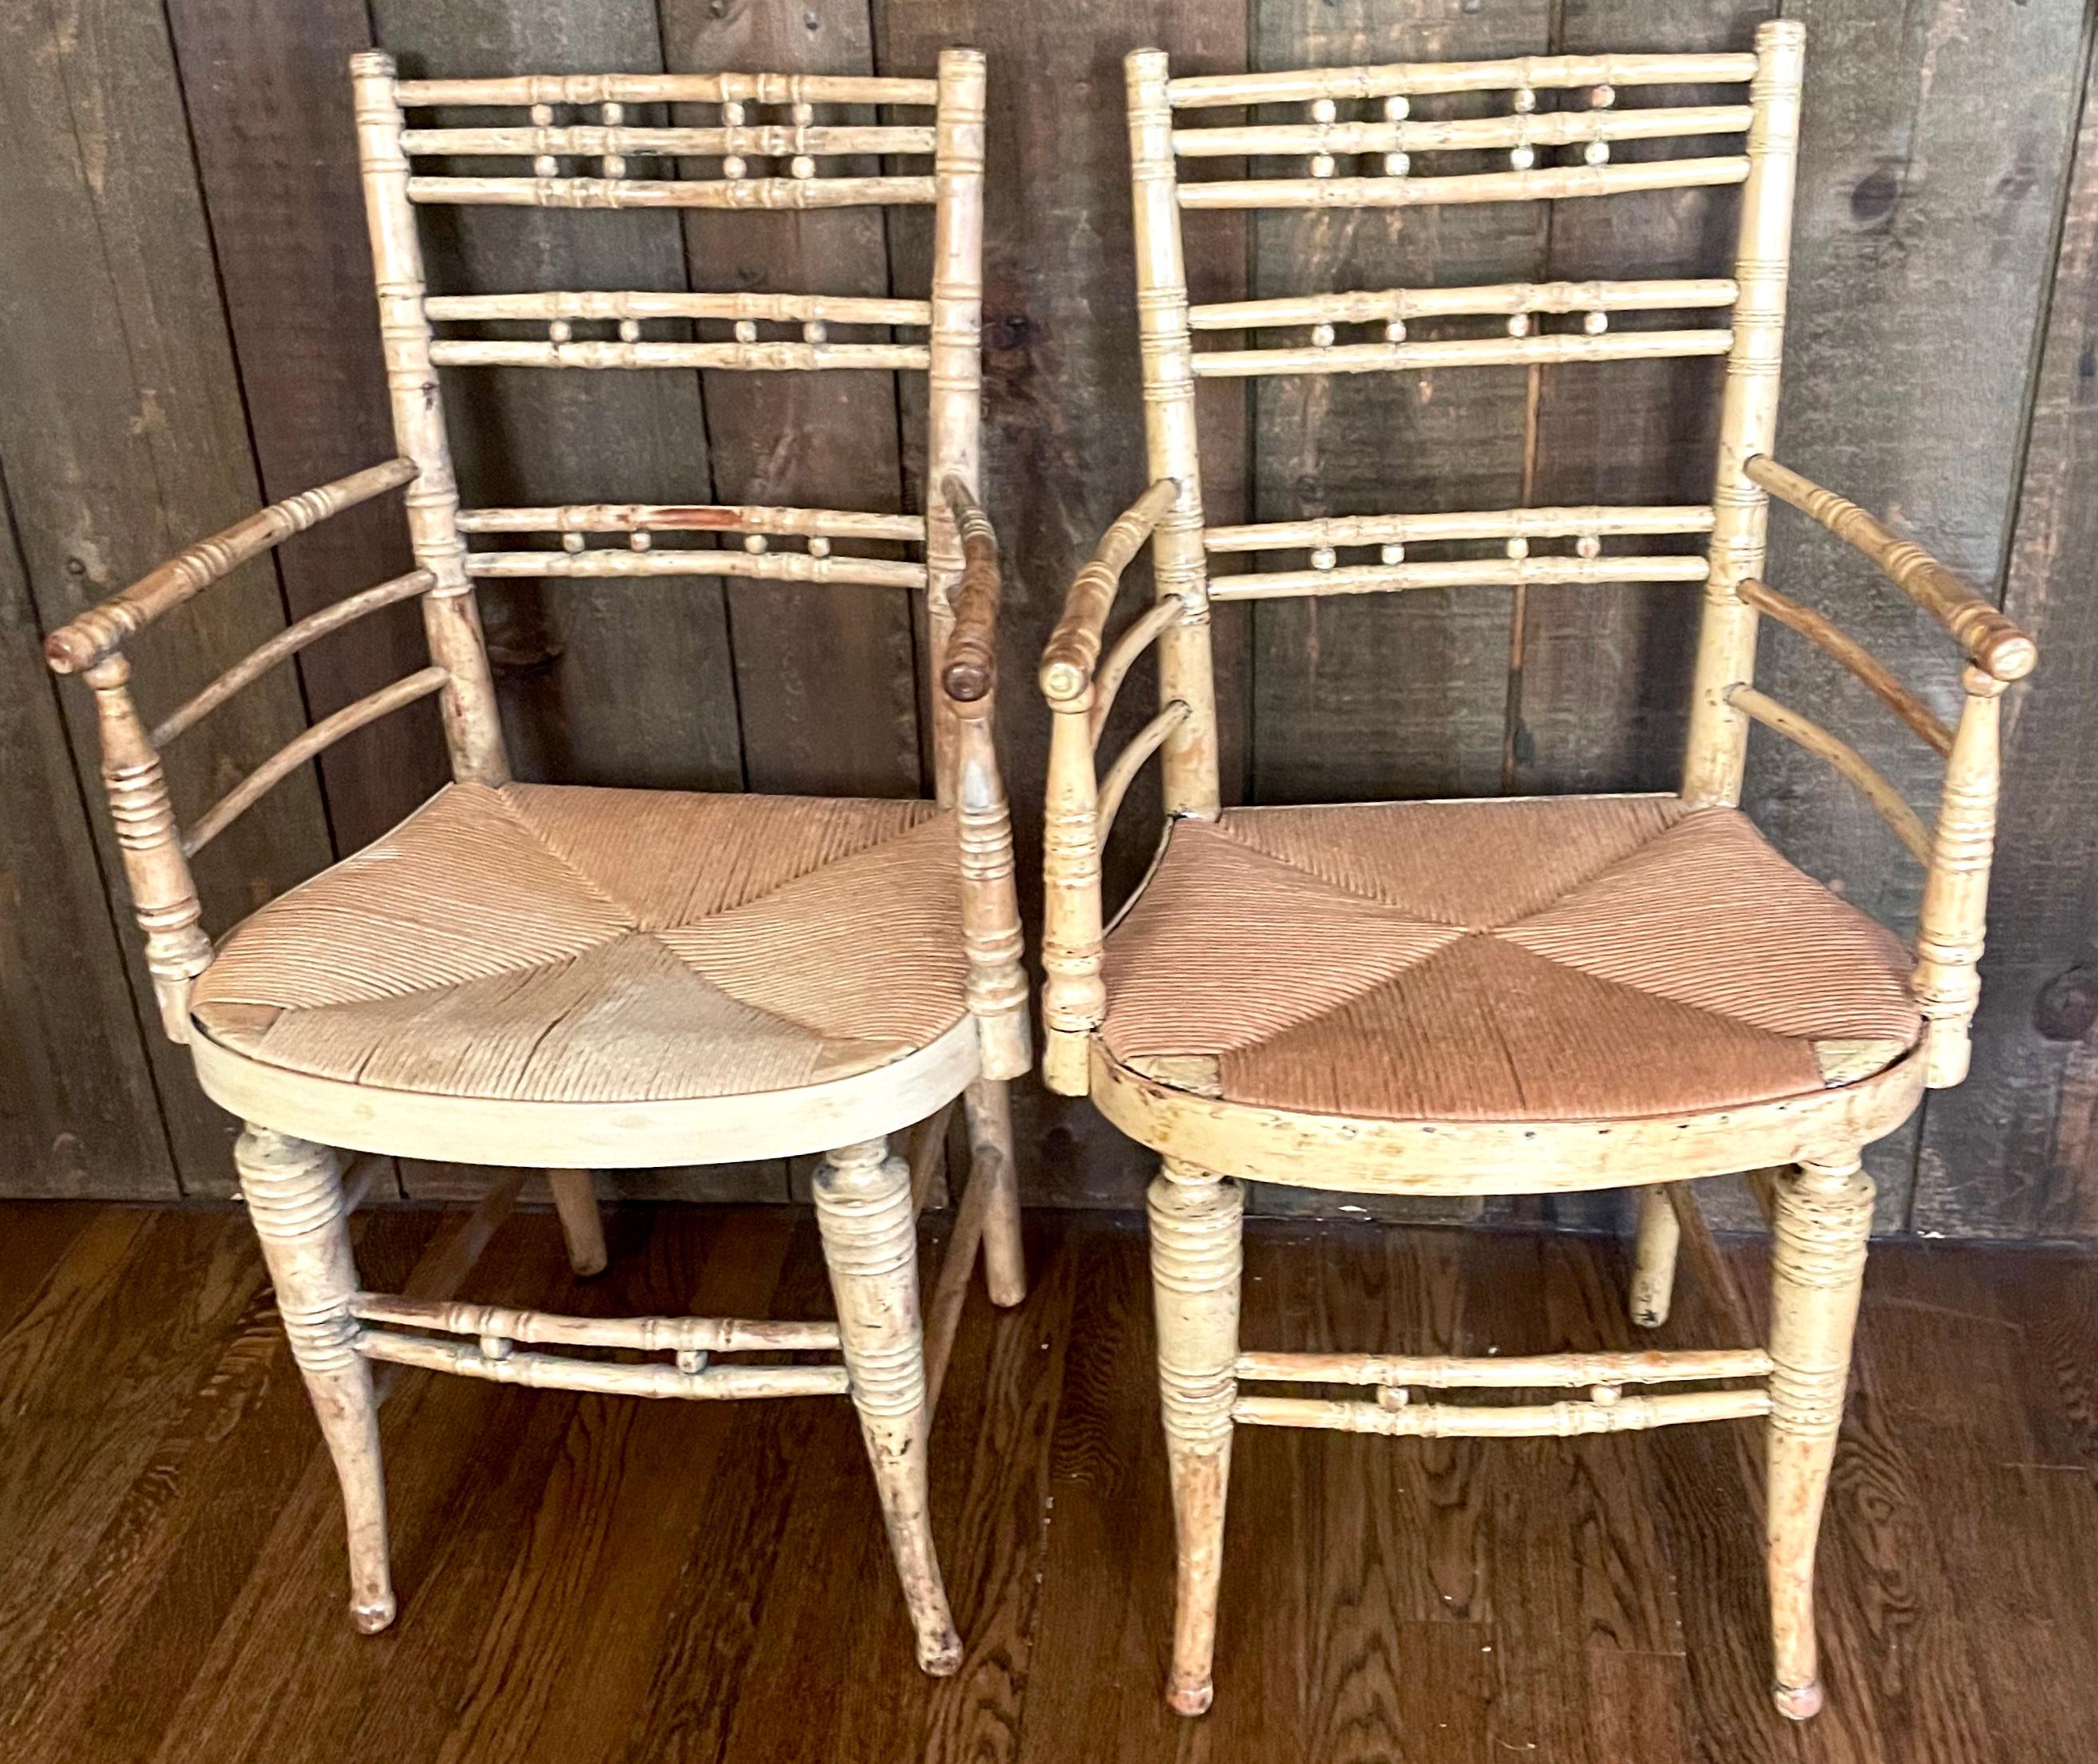 Set of five American turned wood rush chairs. Set of two arm and three side chairs in blonde wood and varied painted finish with carved bamboo like elements and turned and splayed legs. United States Mid-19th Century.
Dimensions: 
Armchairs are